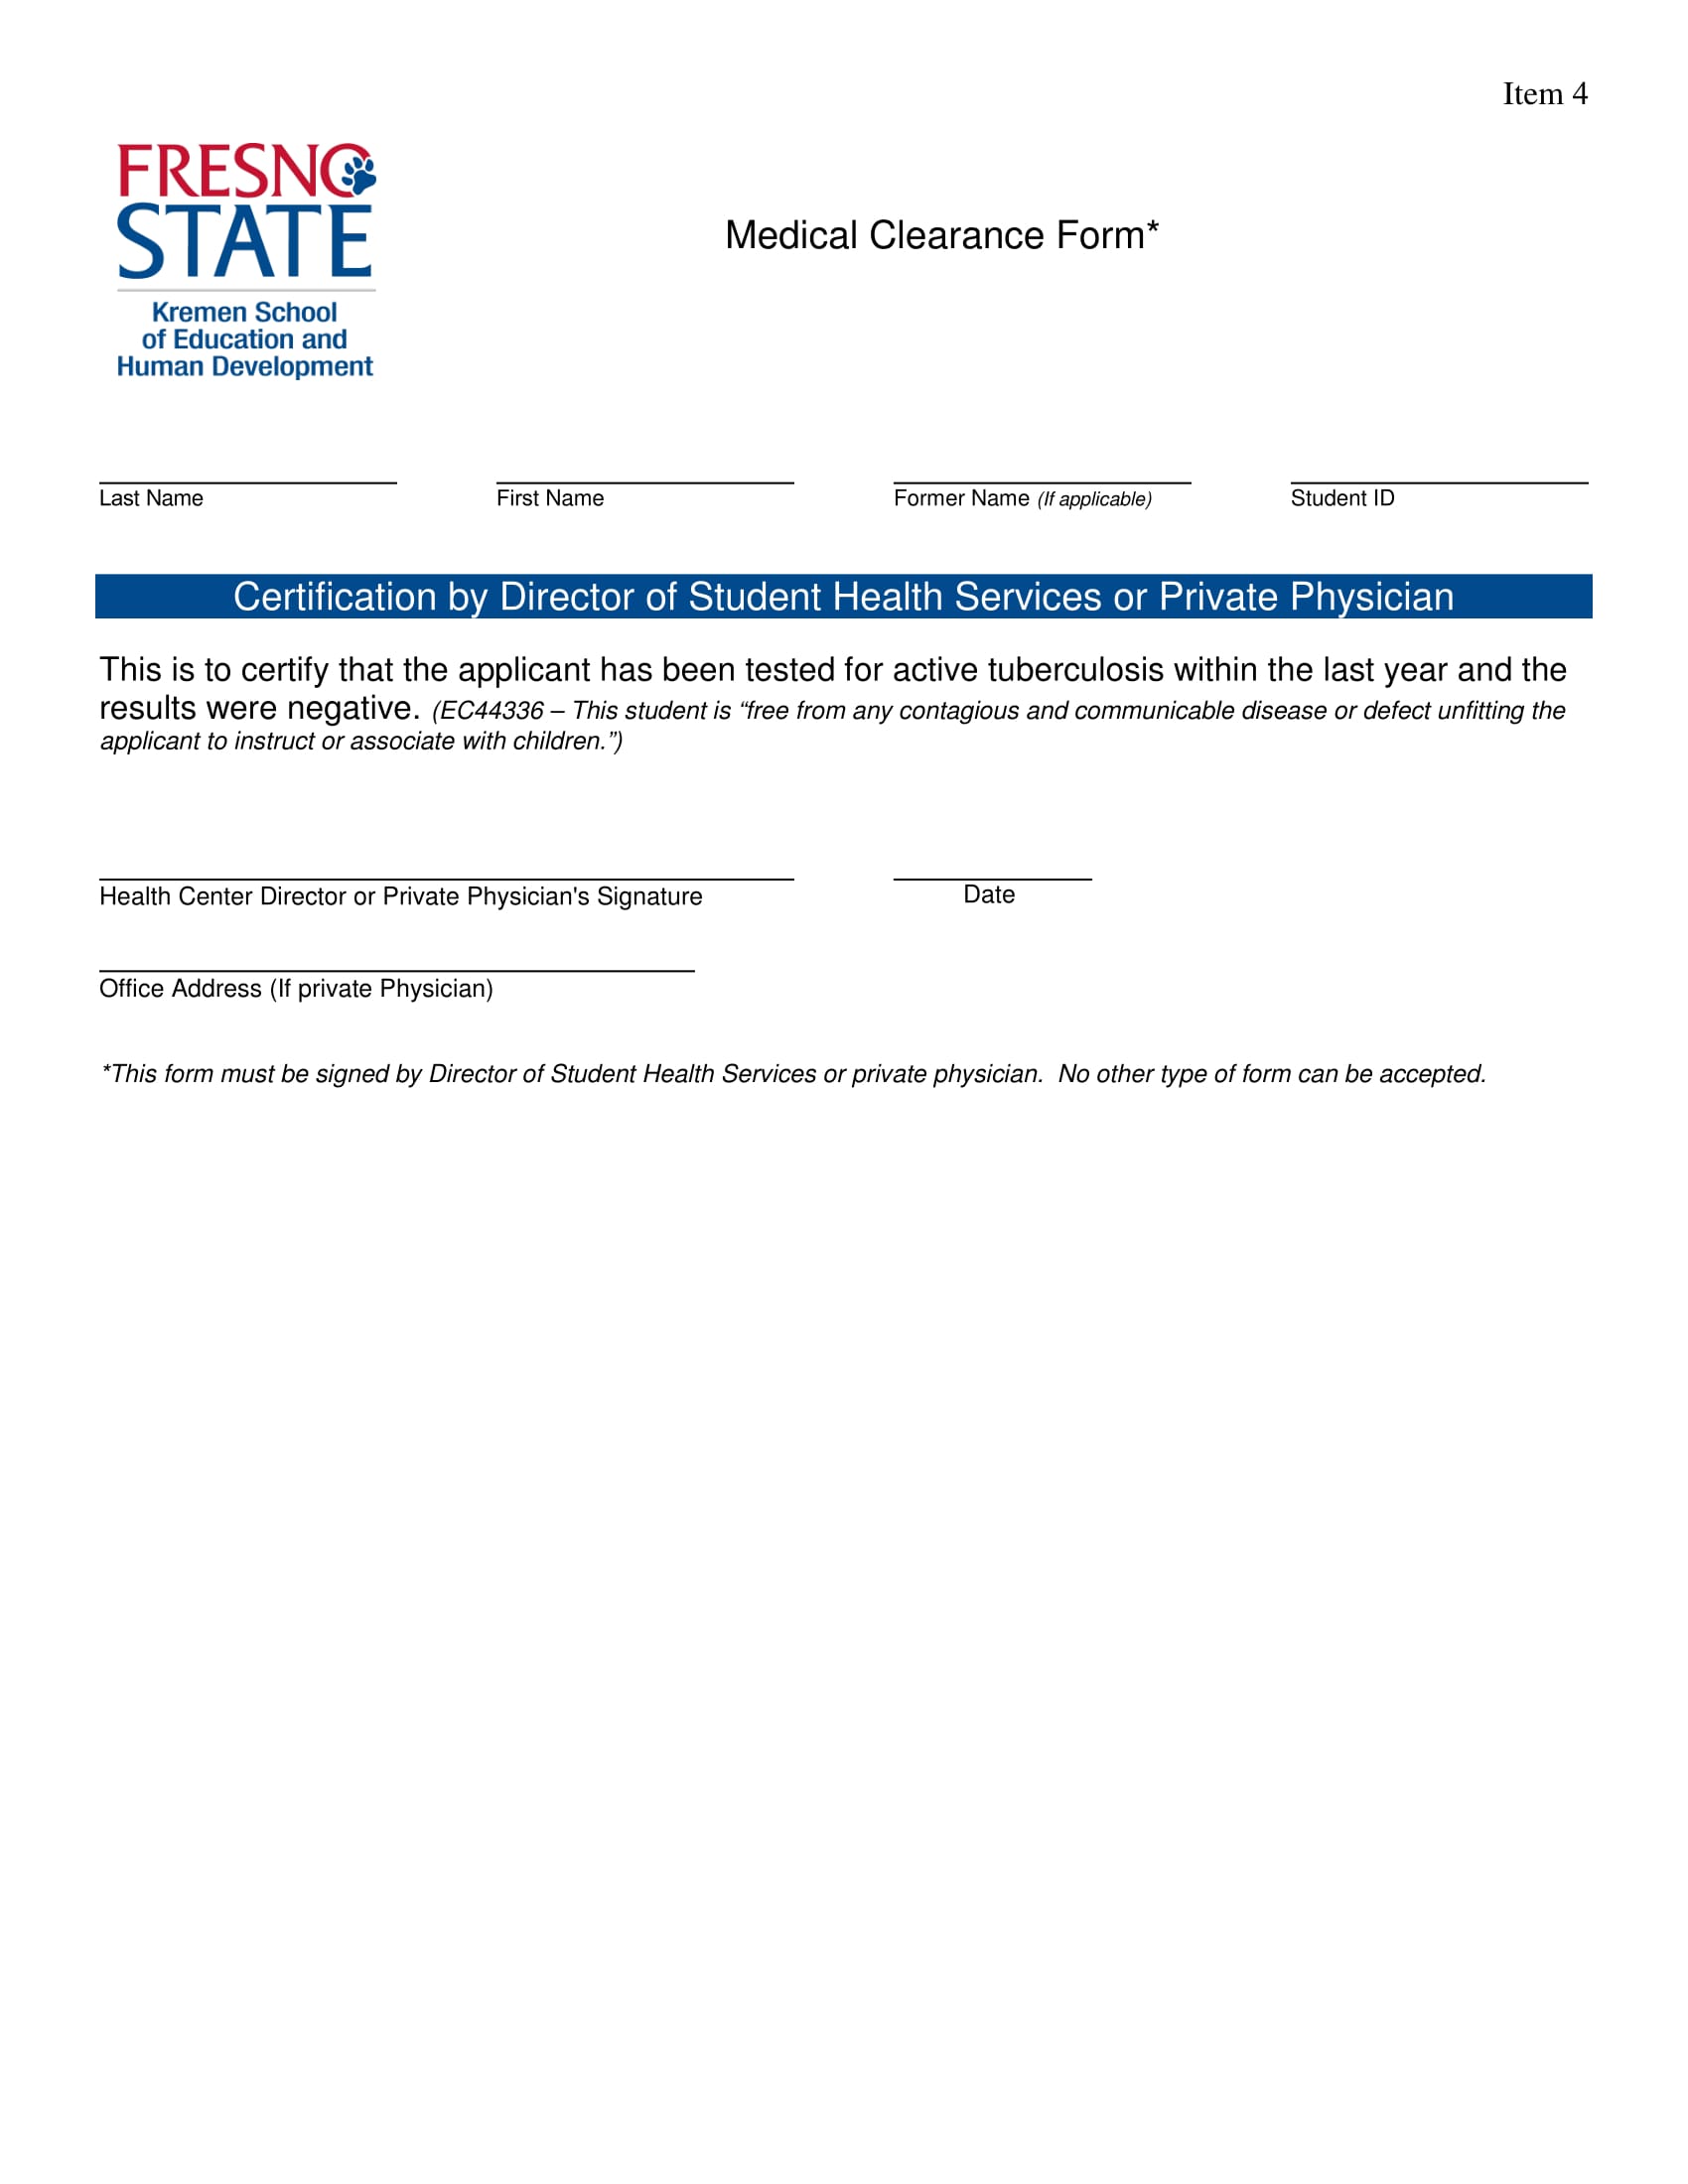 student medical clearance form 1